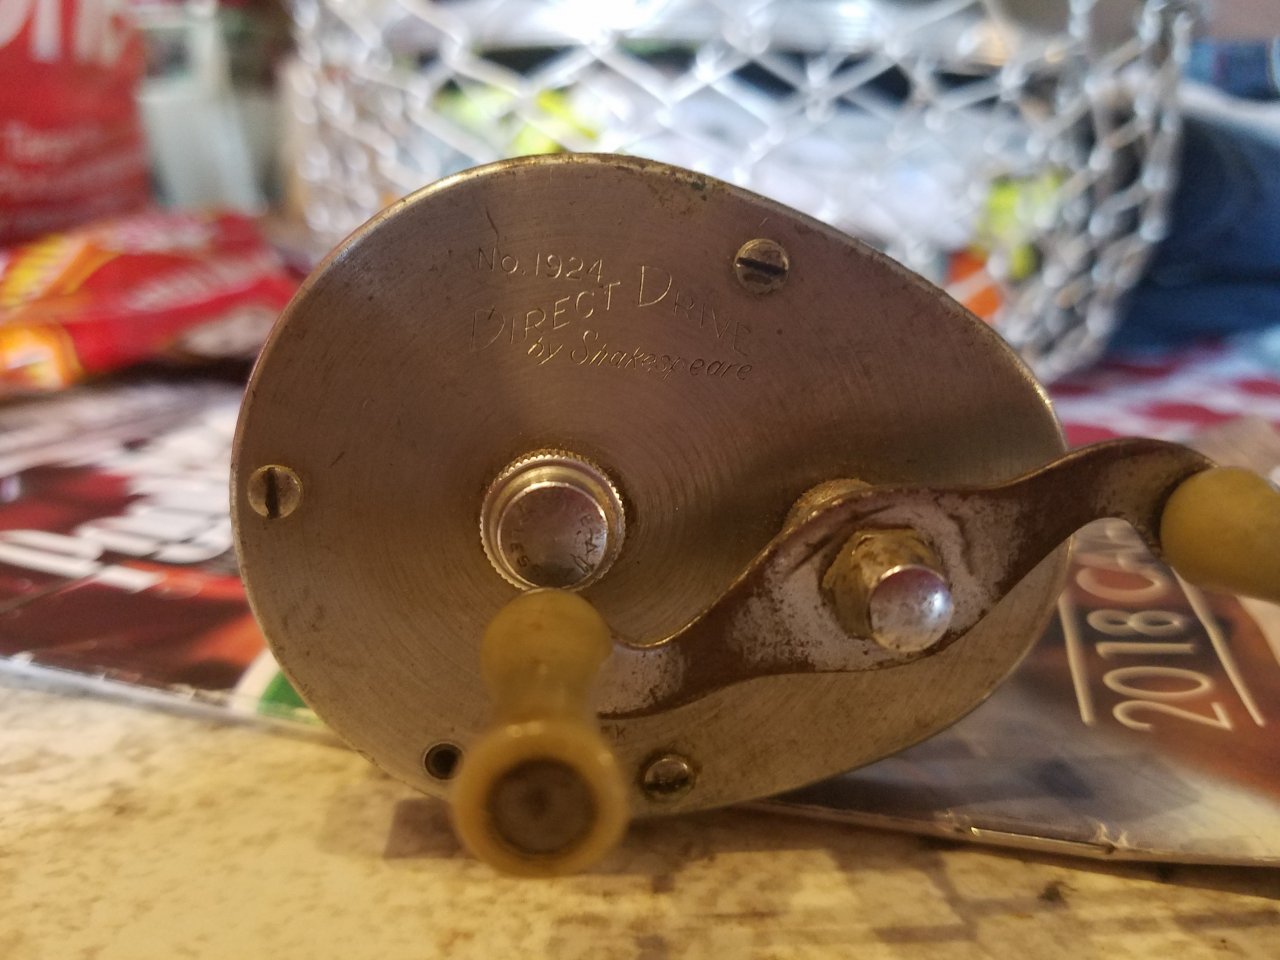 Shakespeare Direct Drive No. 1924 Model FK Reel That Is On A